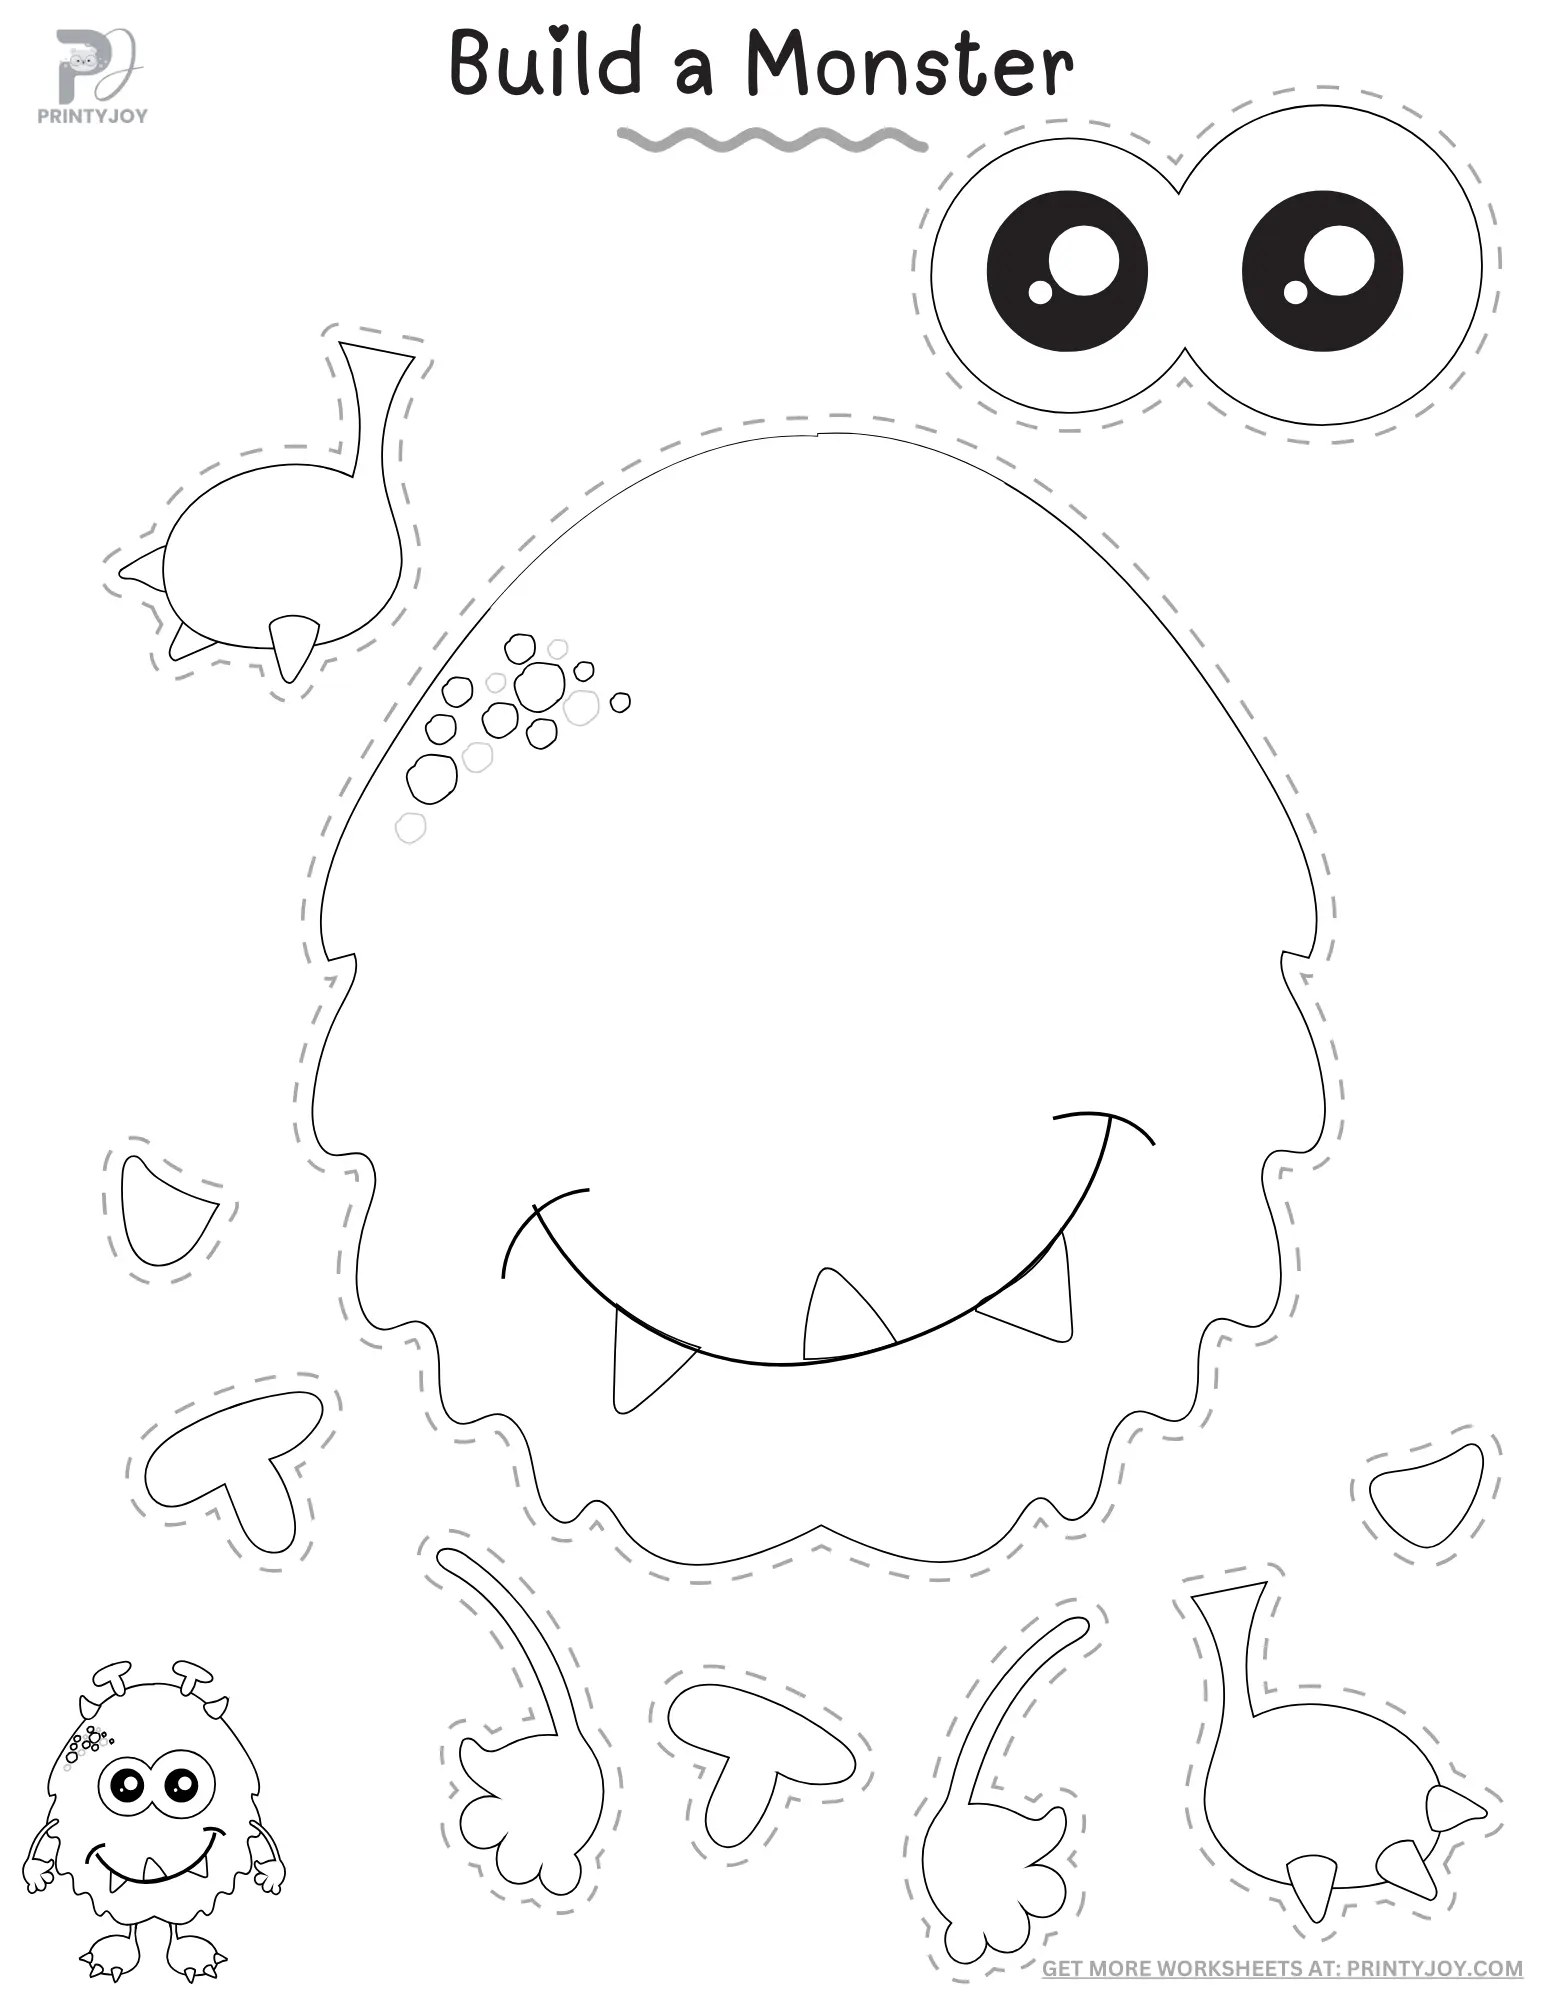 Build a Monster Craft Free Printable